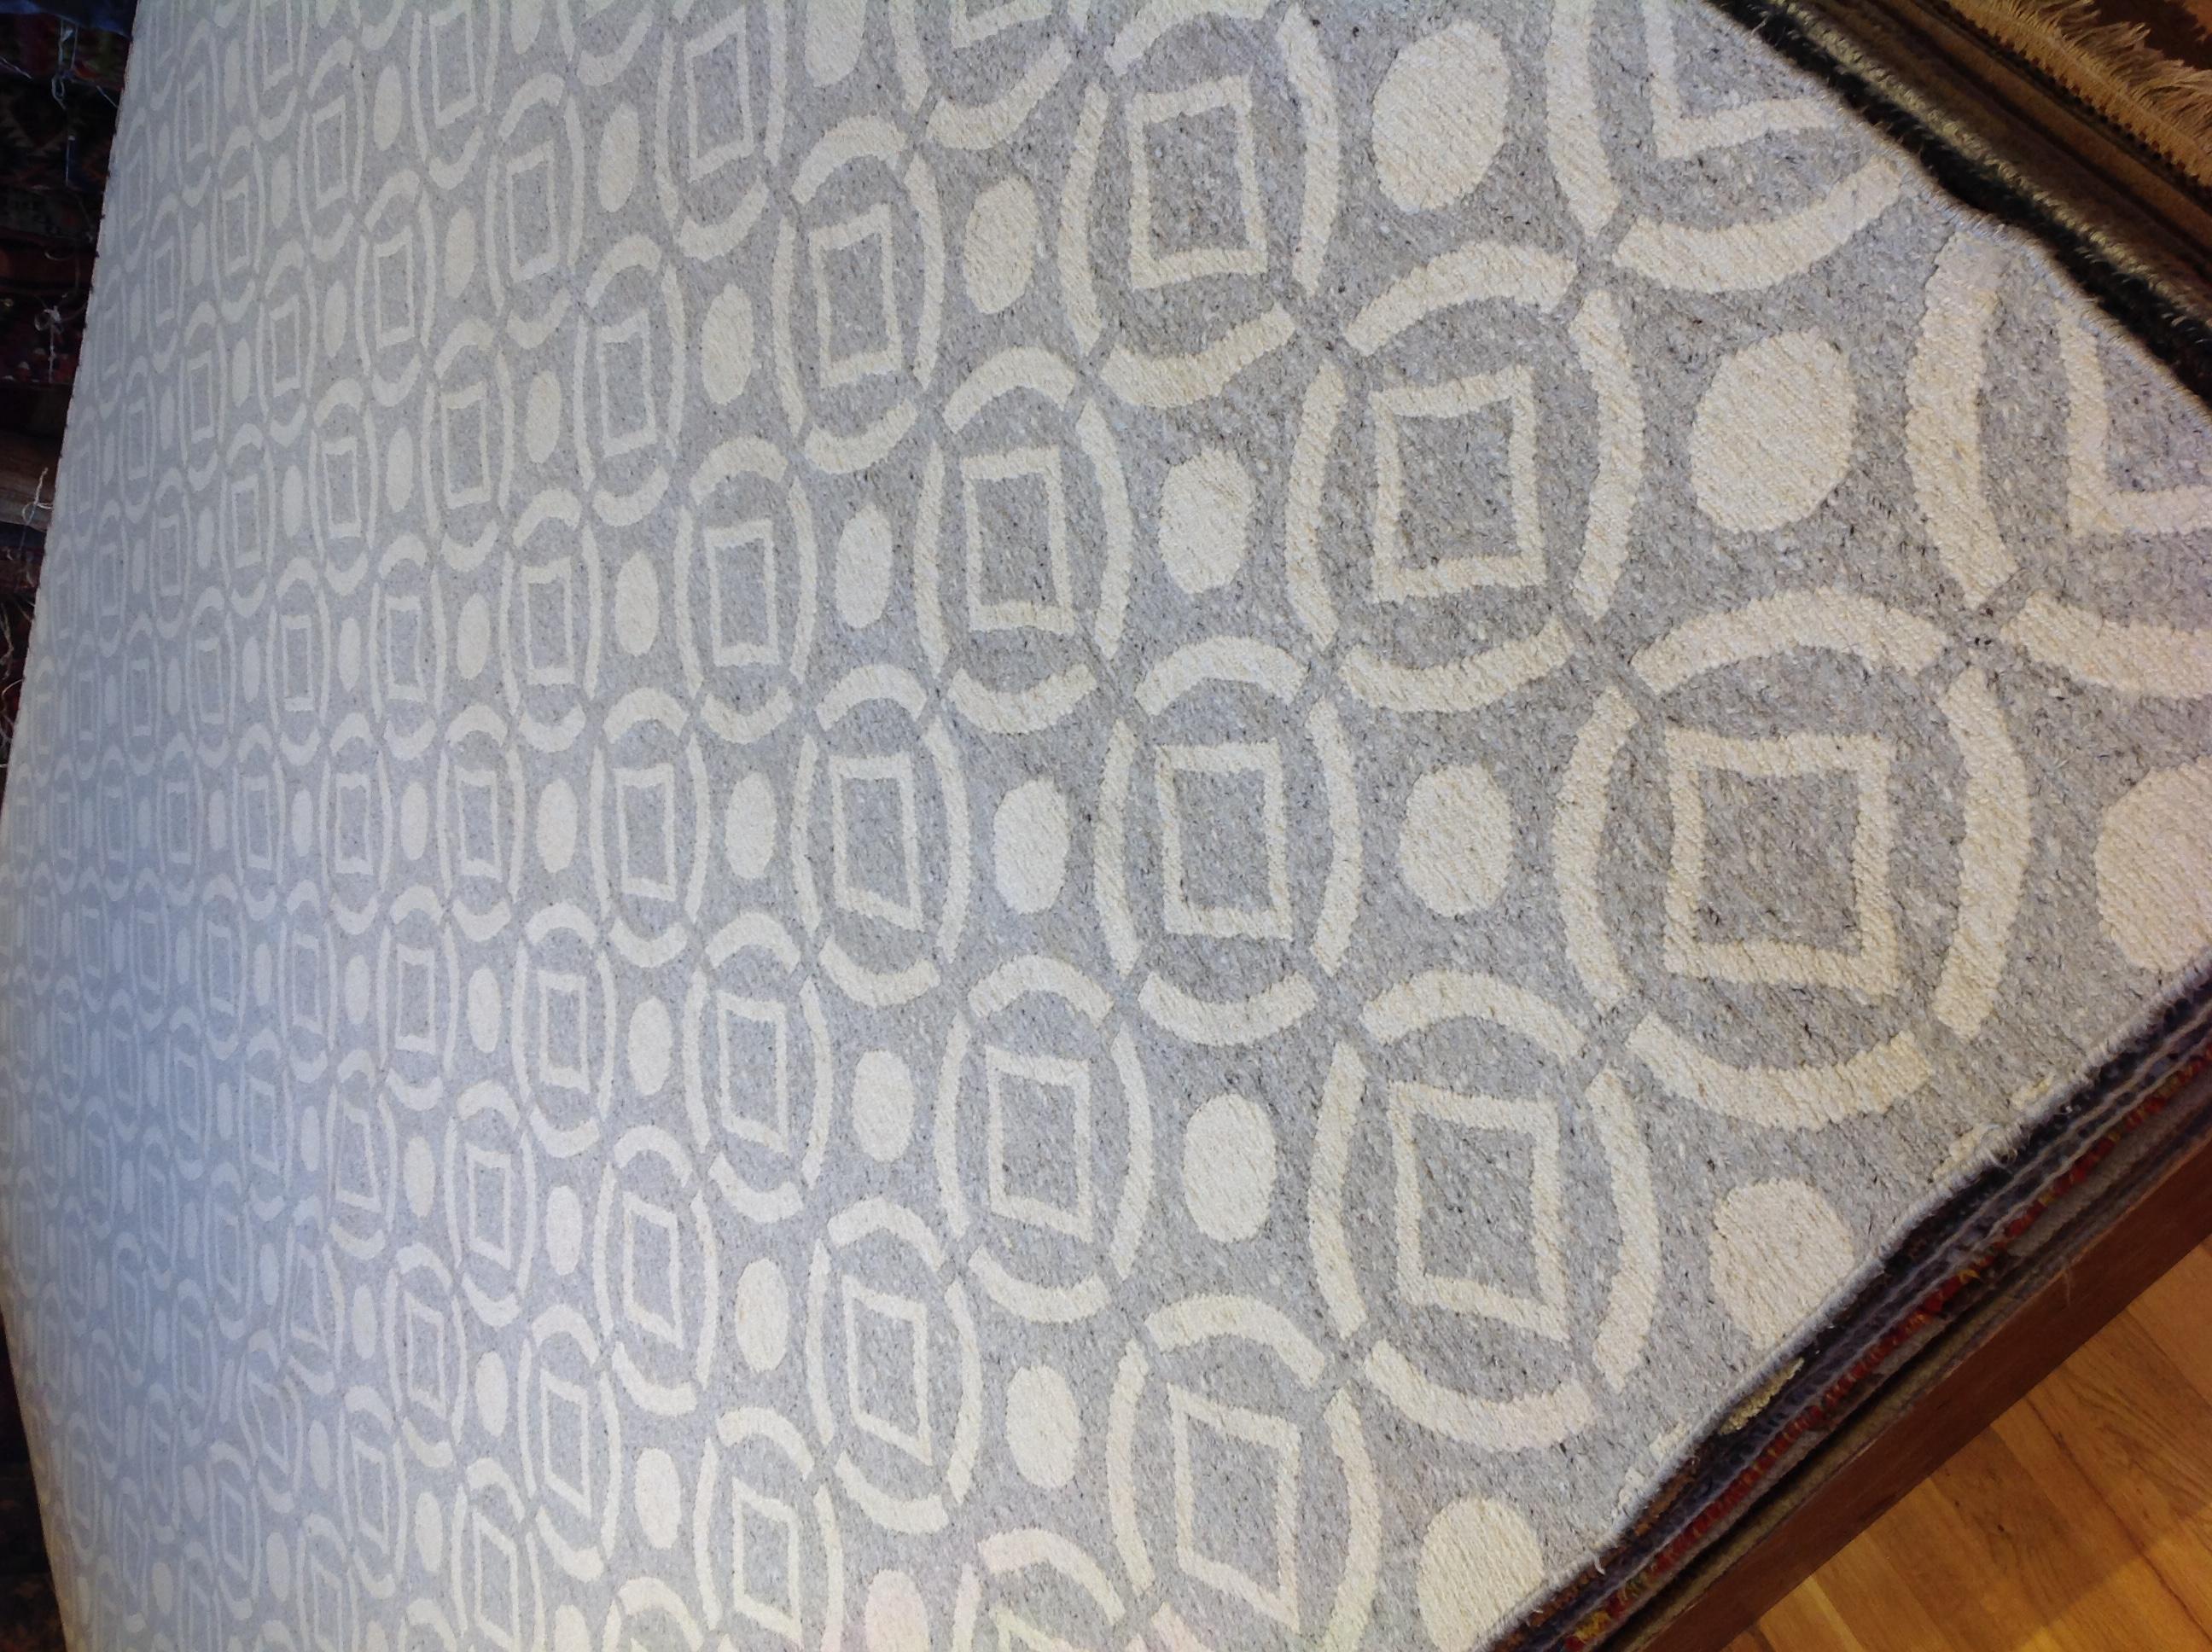 Diamonds and circles create an intriguing pattern in this contemporary wool area rug. Hand knotted wool construction creates a wonderfully nubby, and durable, texture. Made in India.